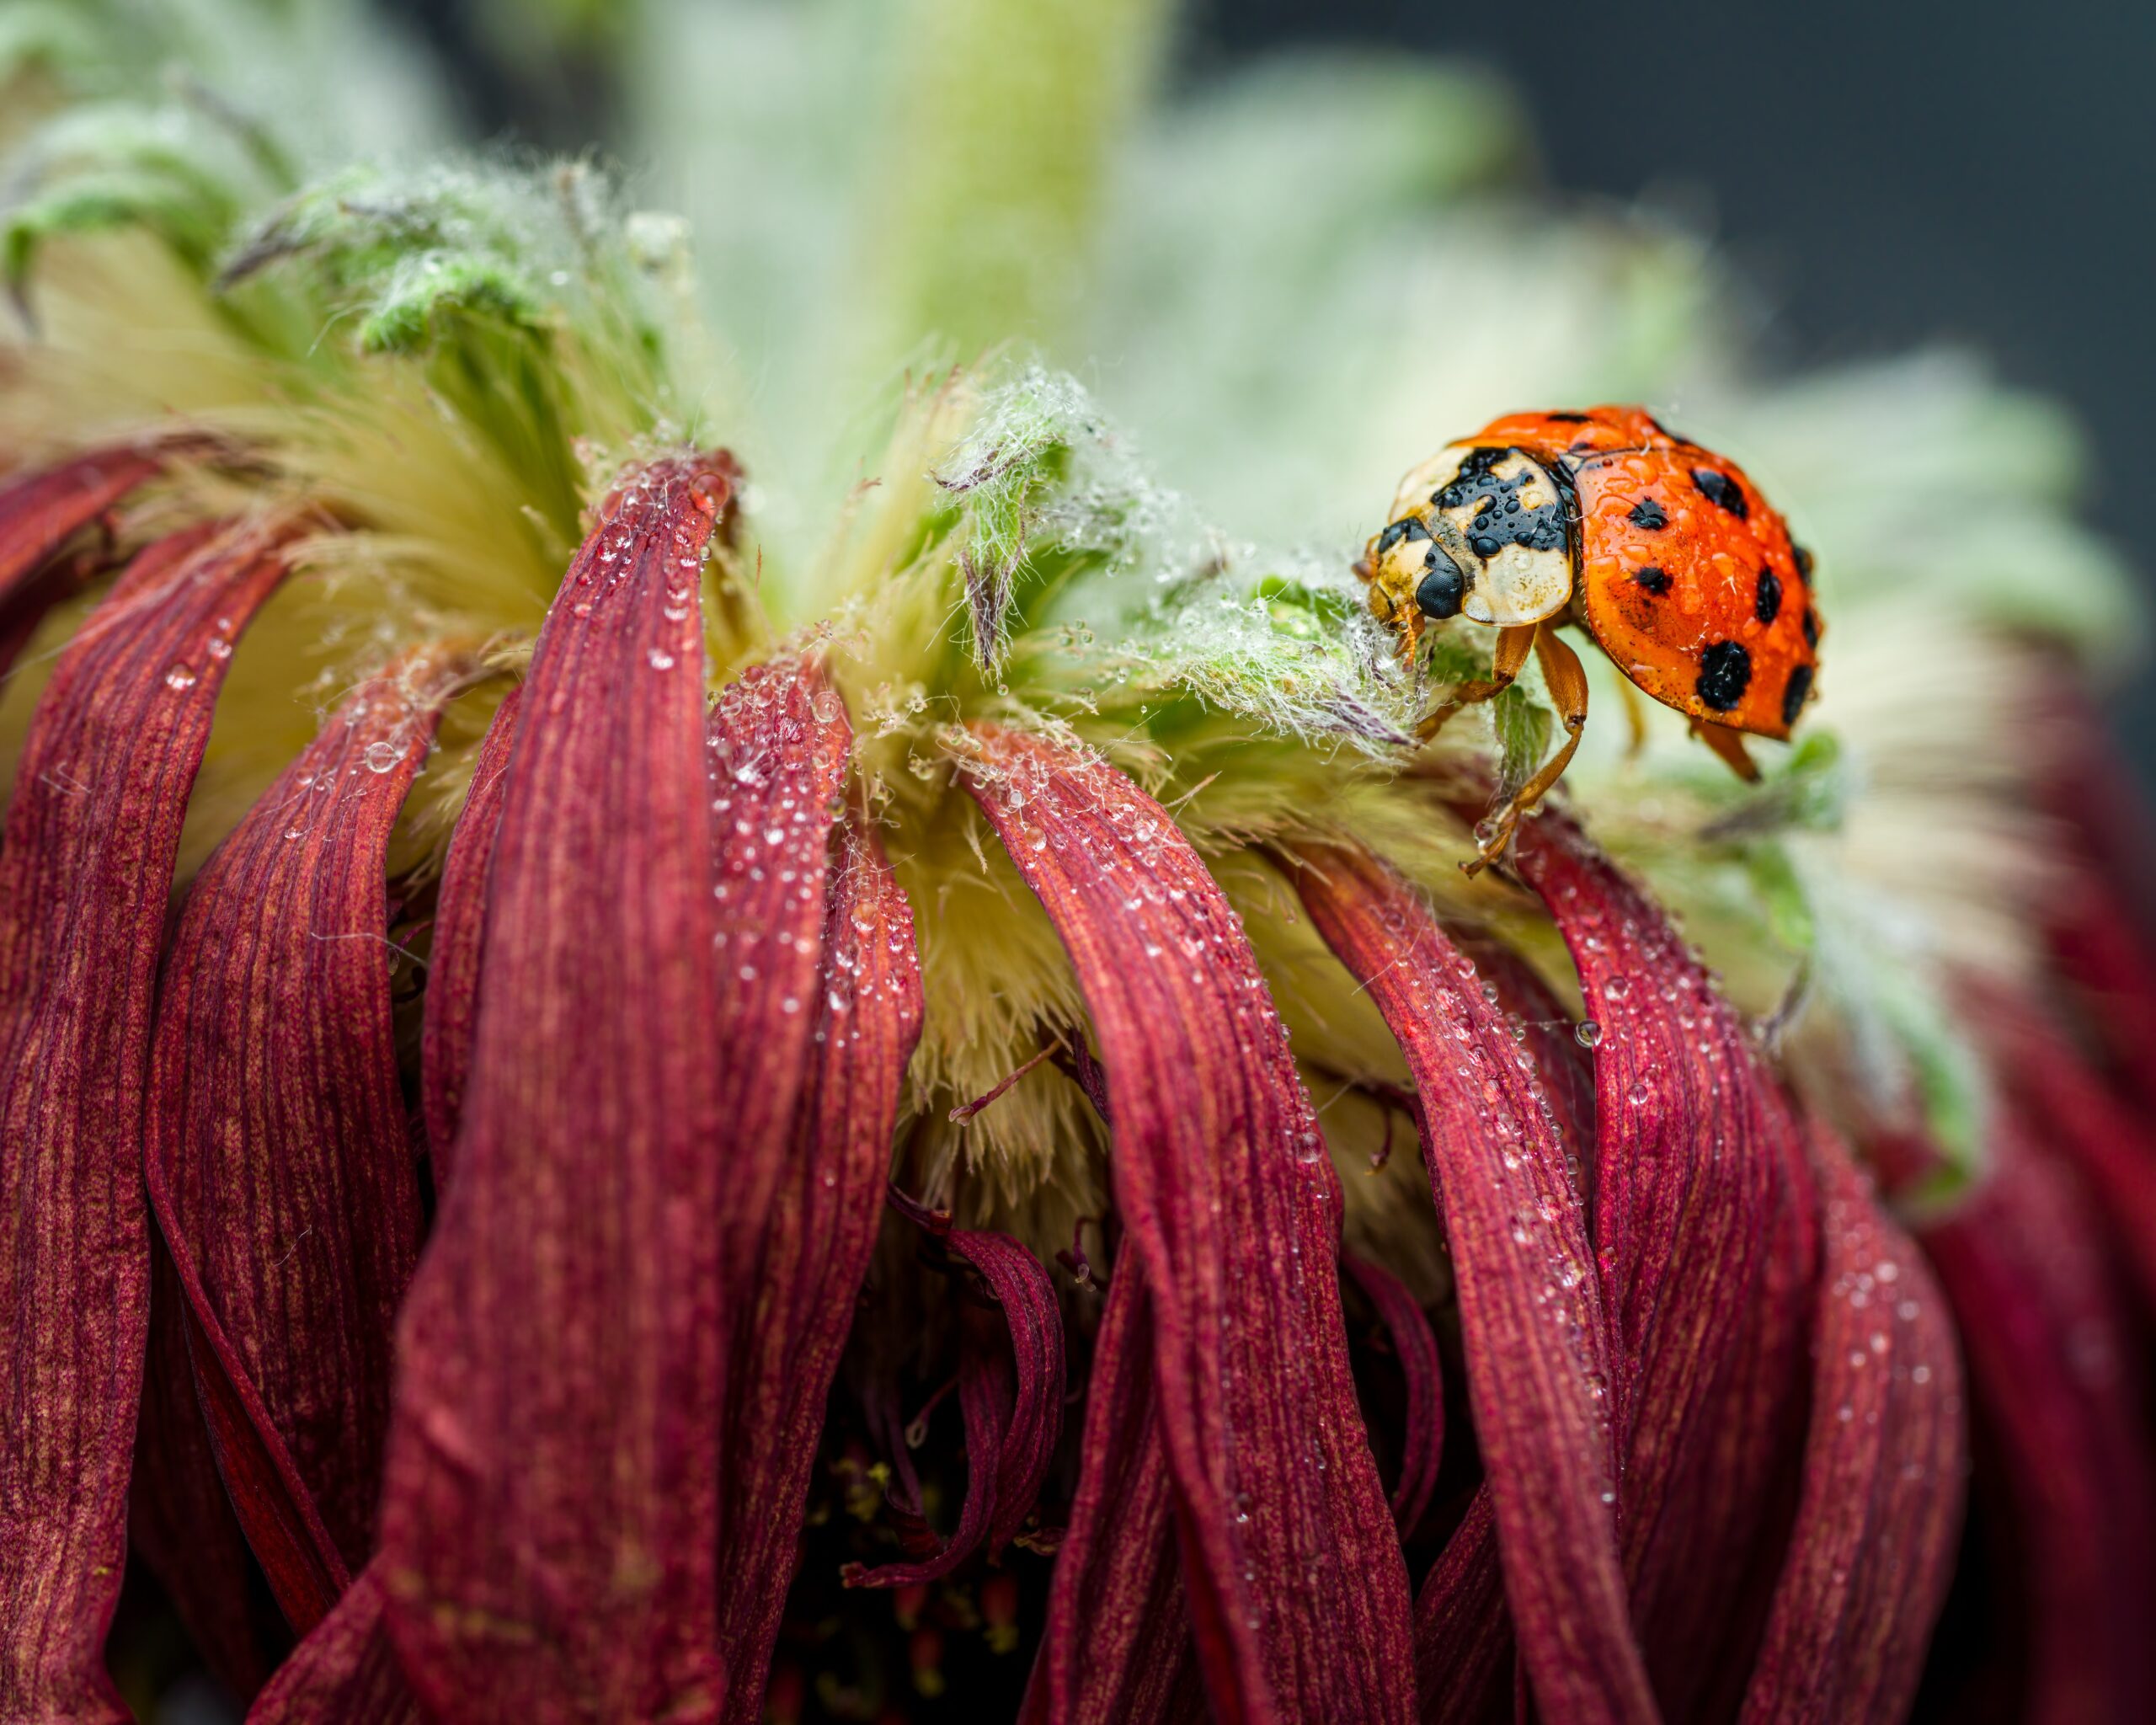 Ladybug vs. Asian beetle and how to get rid of them by AgriLife’s Mario Villarino